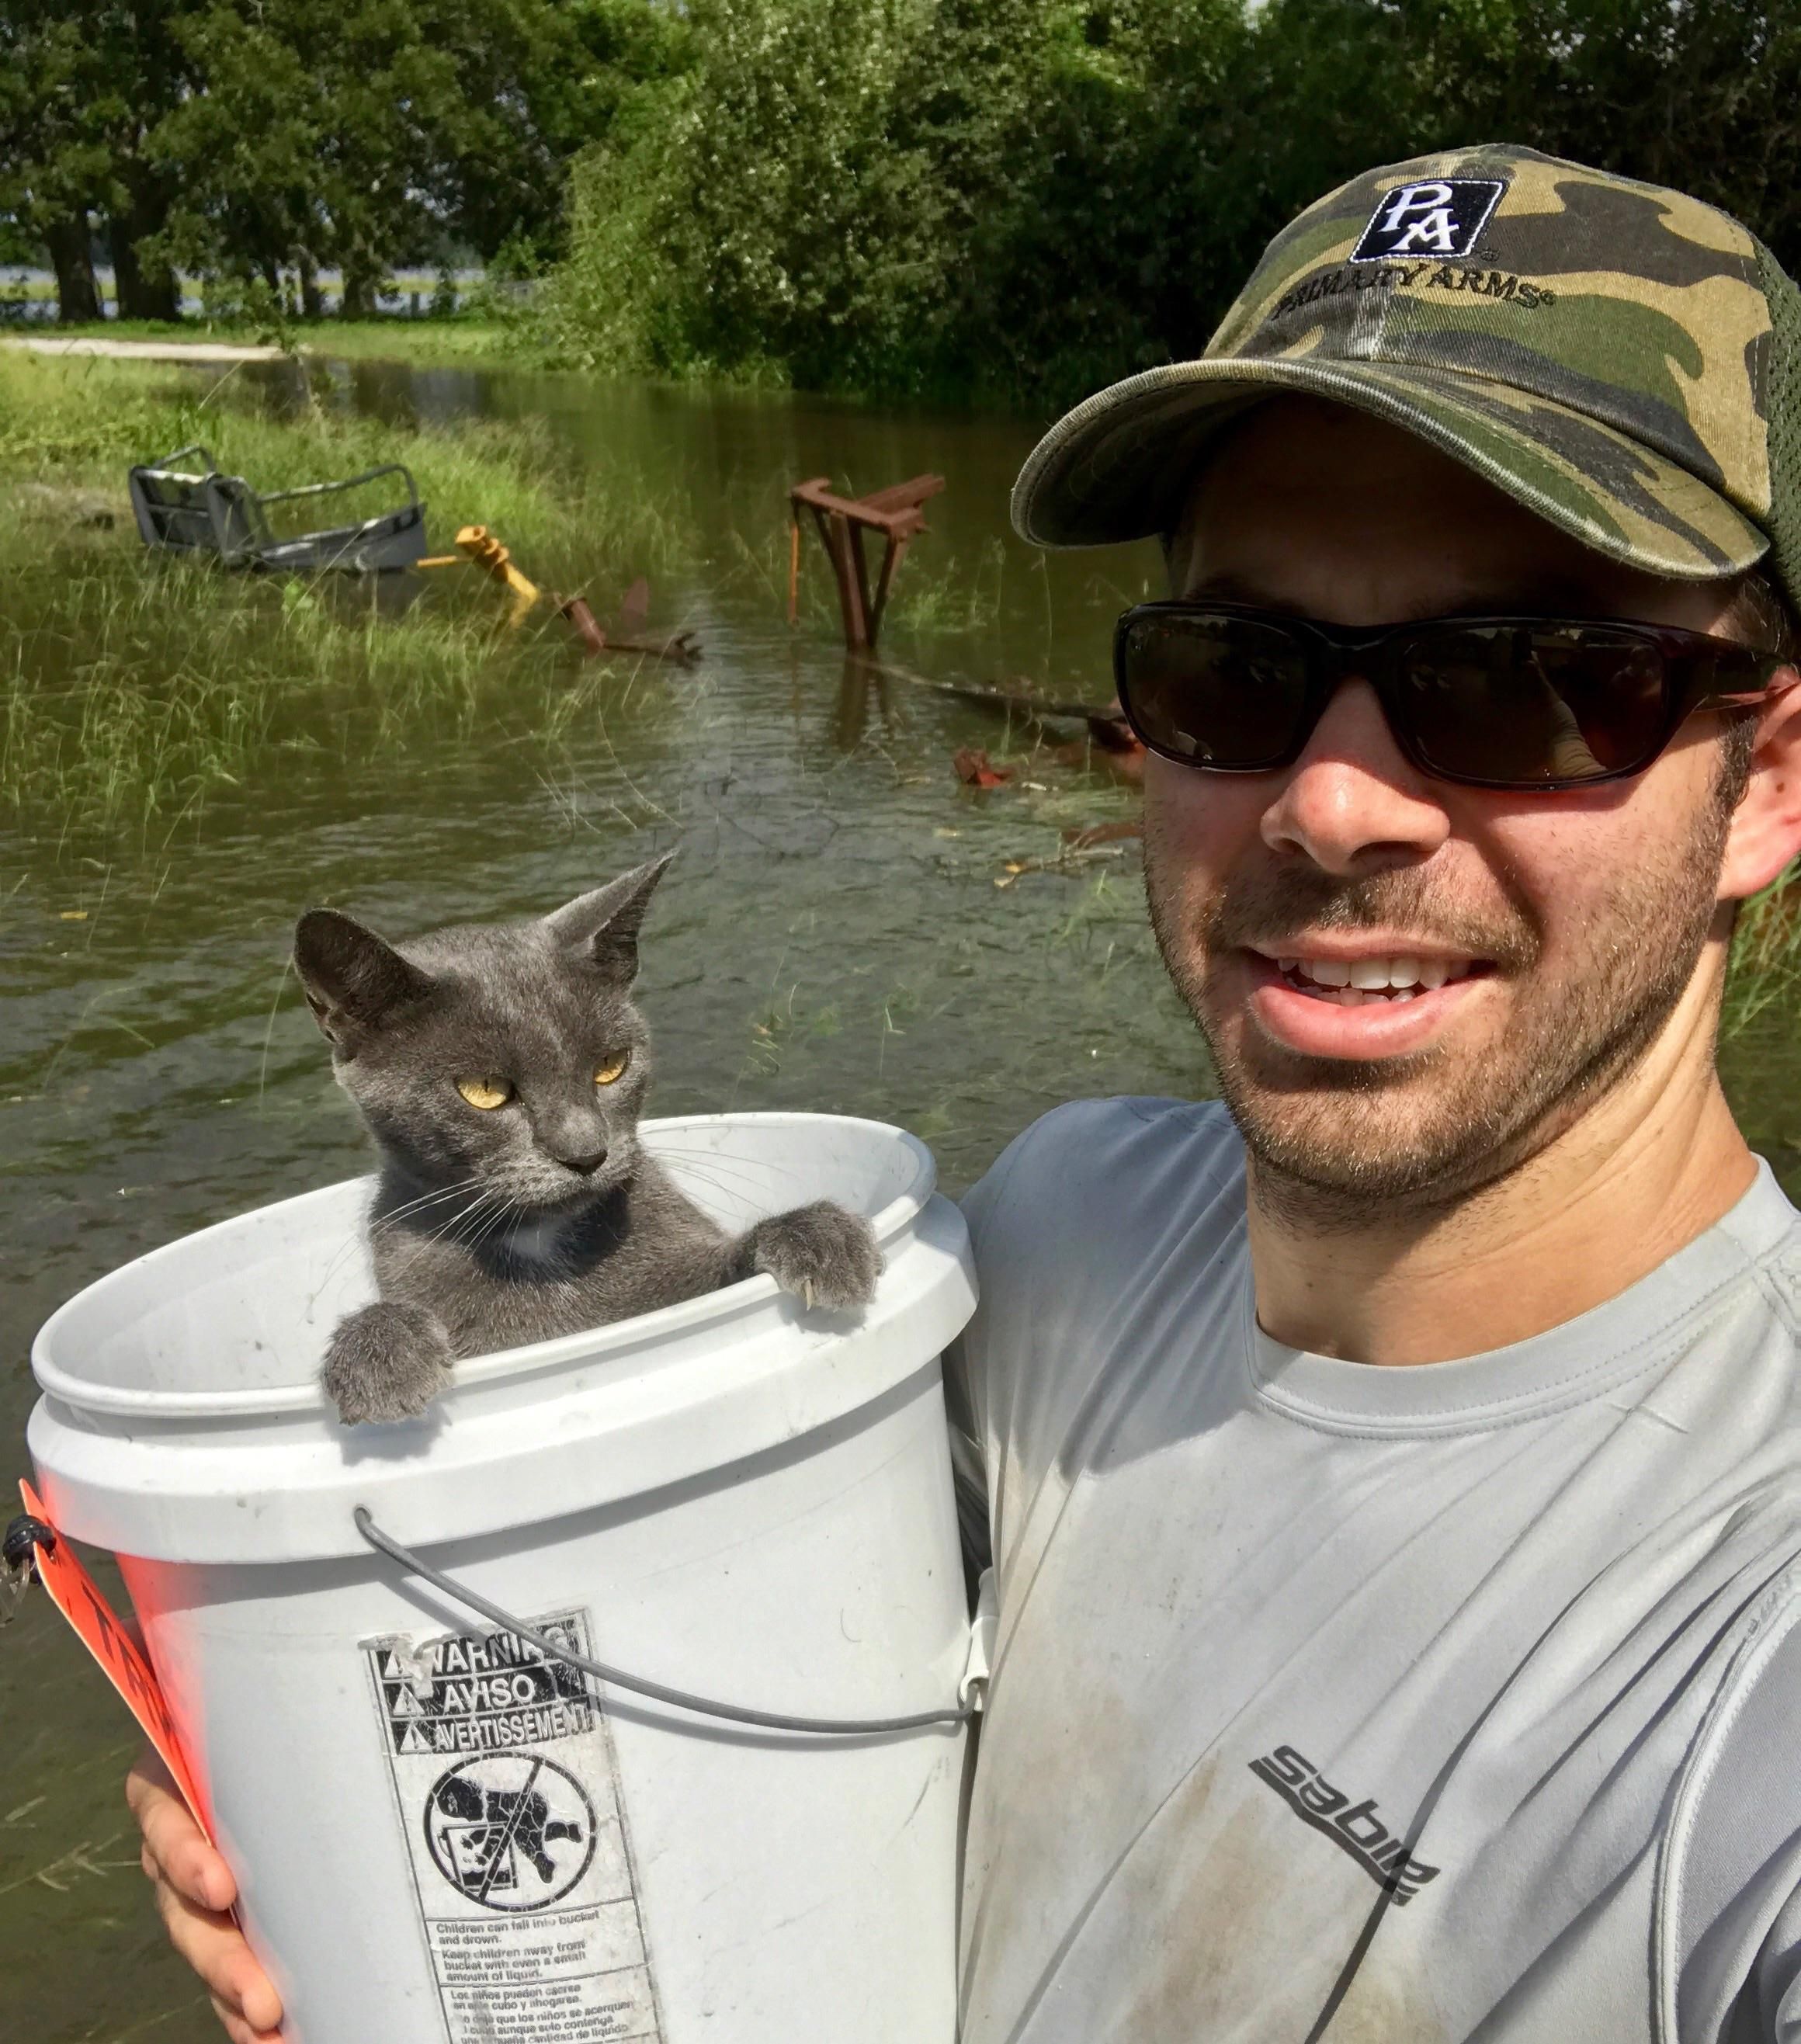 Even when being rescued from hurricane floods, this cat is just over it.